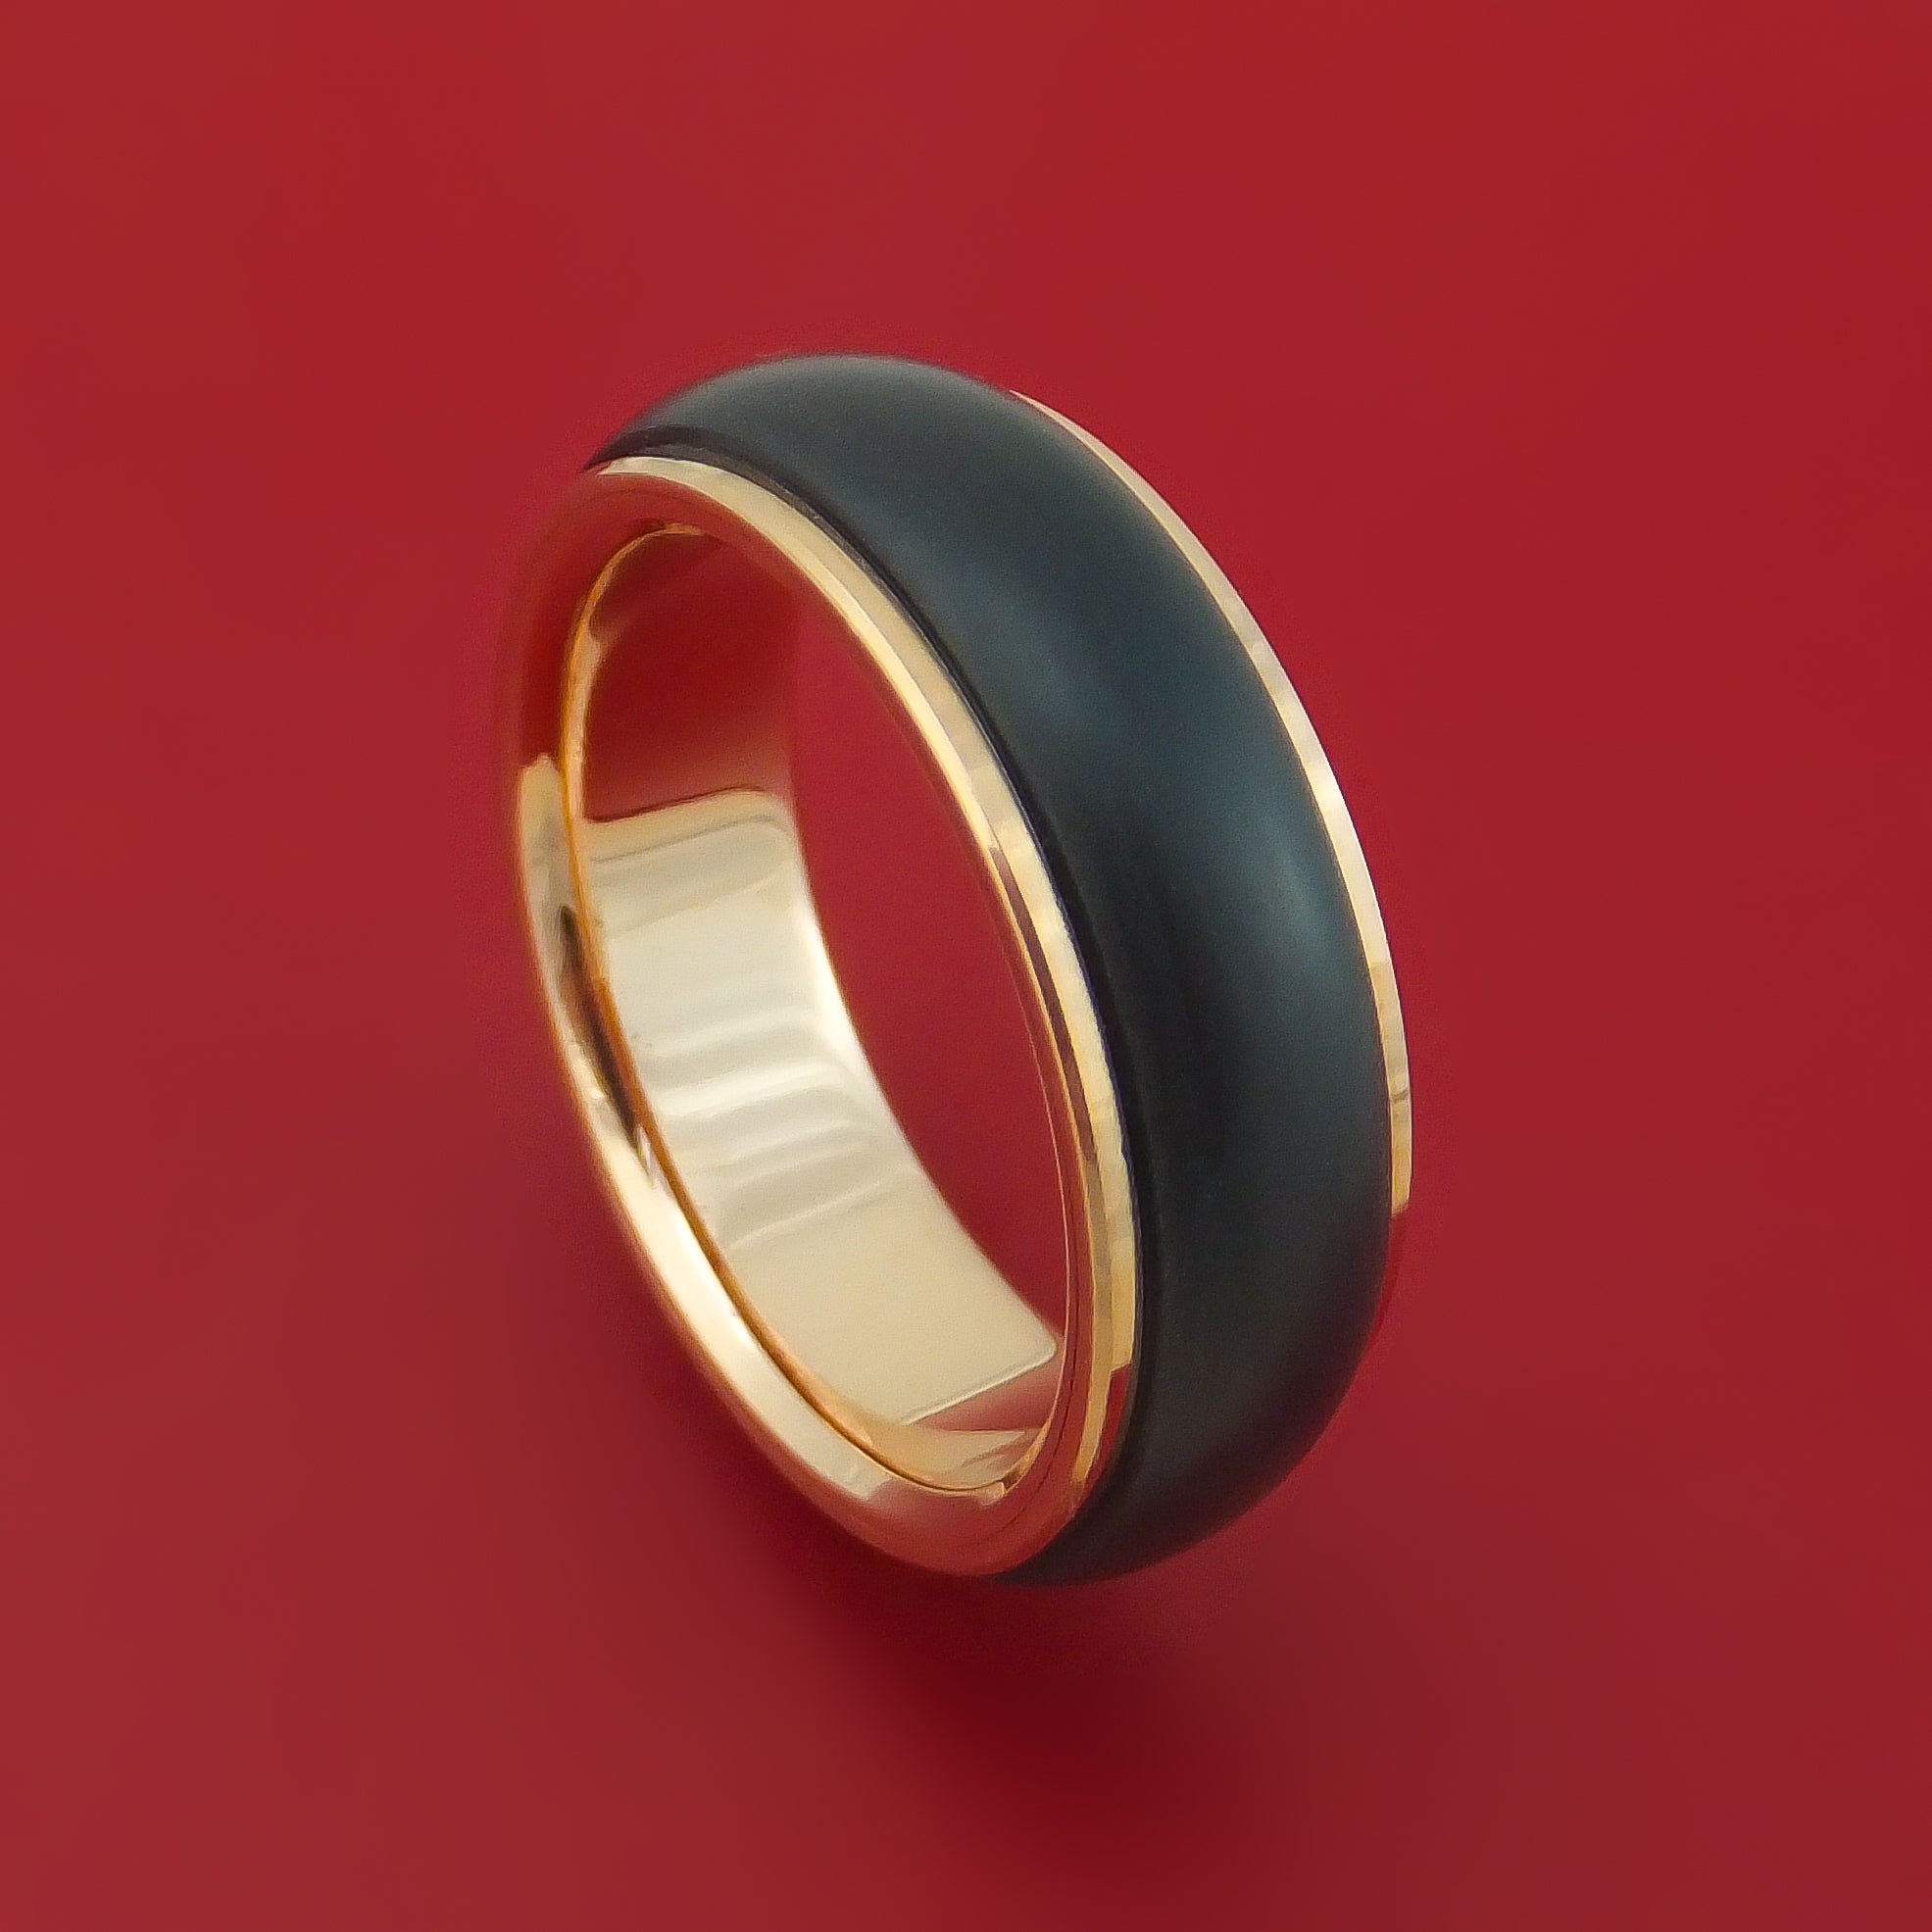 Carbon Fiber Twill Ring With Gold Sparkle Interior - Etsy